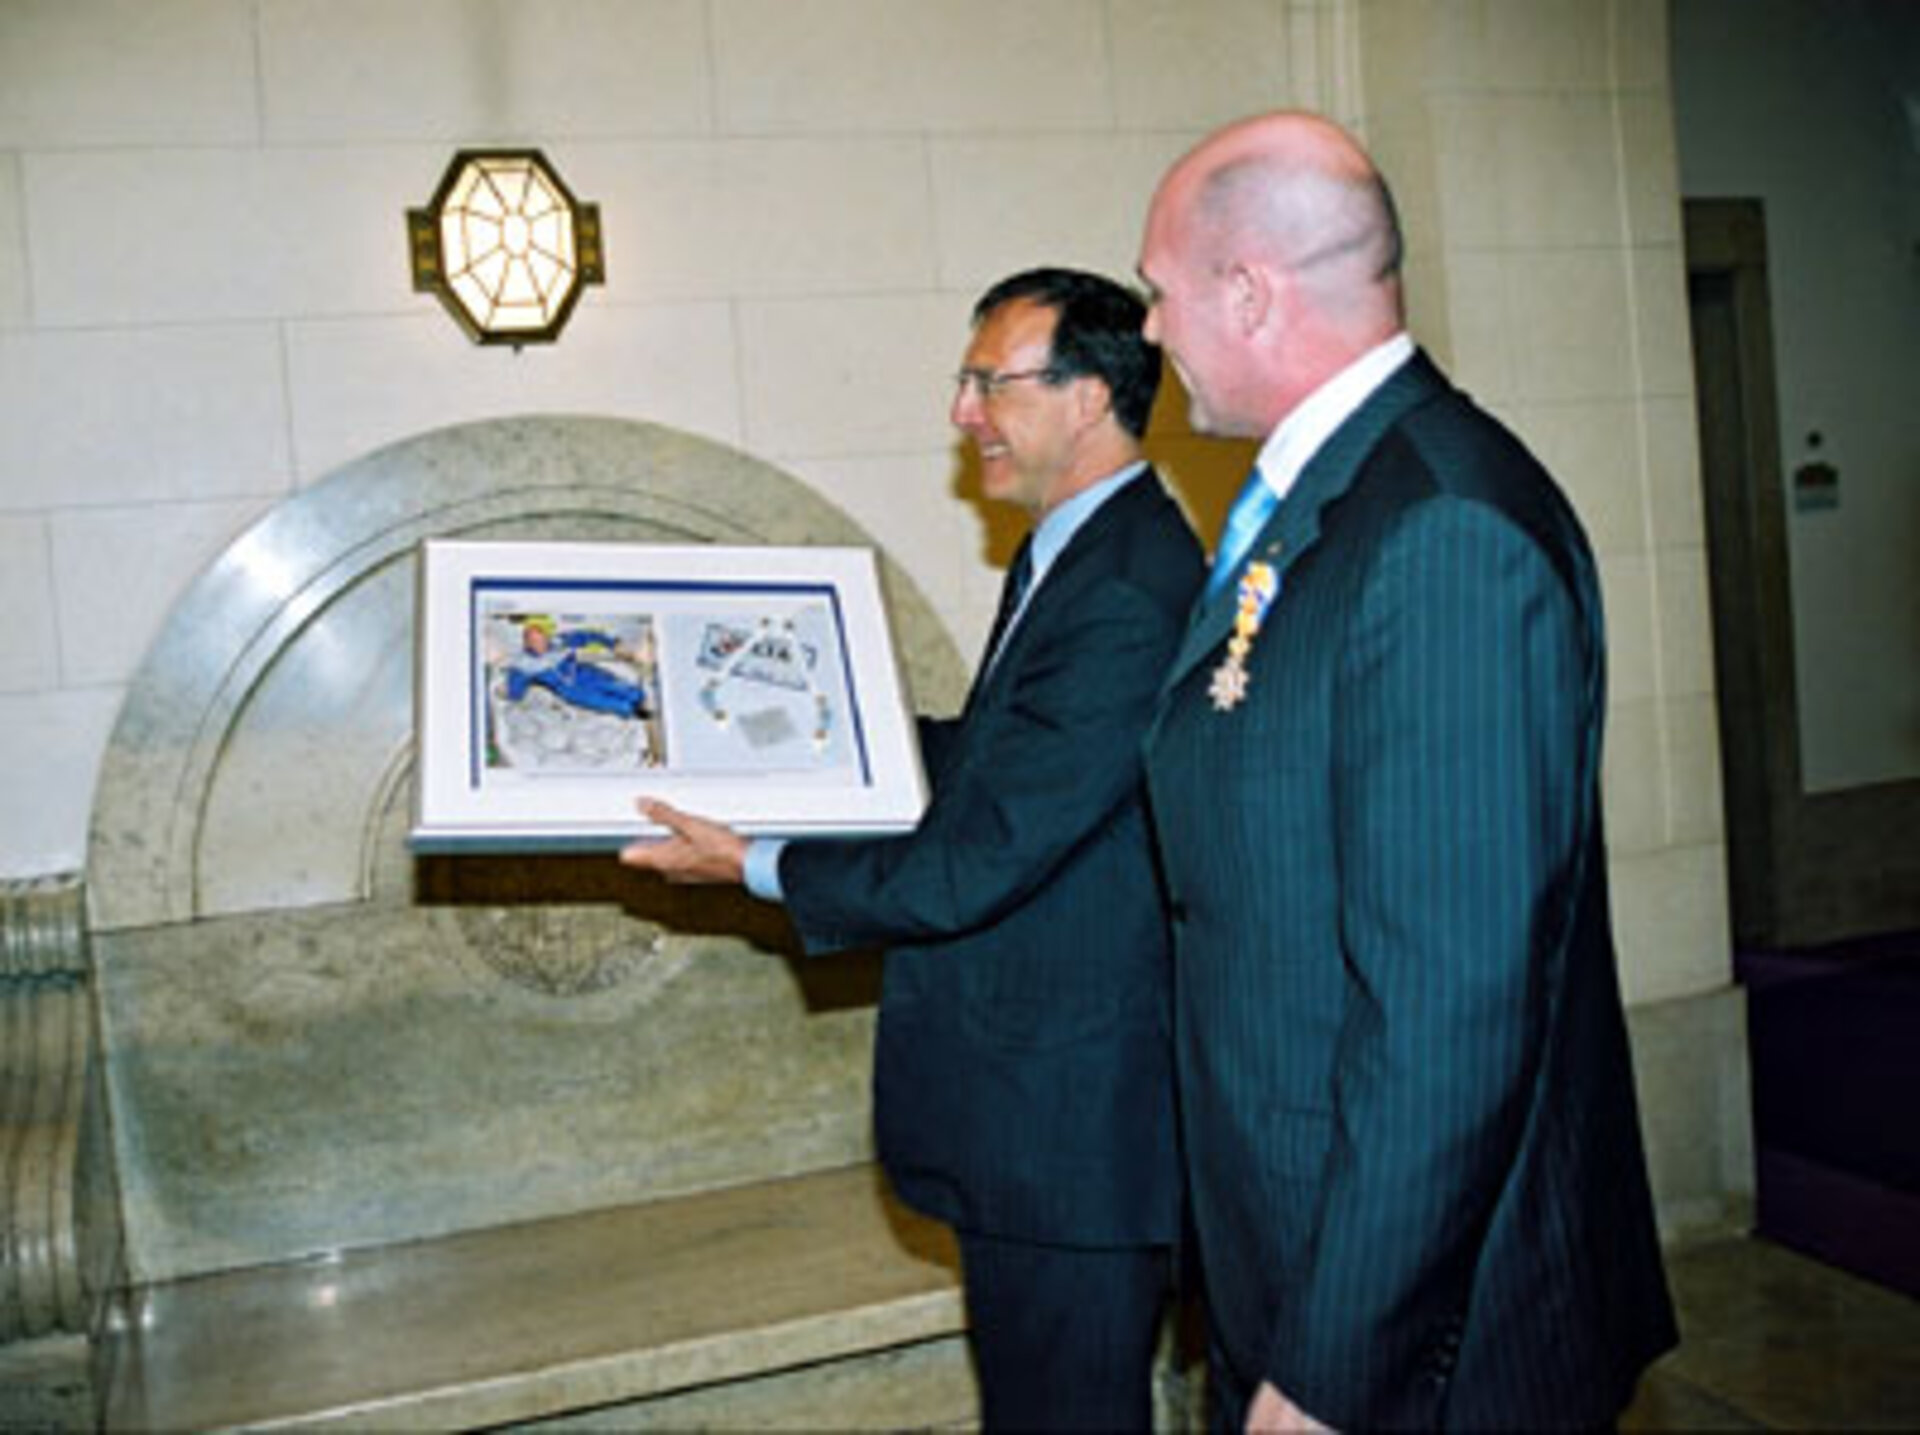 André Kuipers presents Minister Brinkhorst with a scale model of the European Robotic Arm